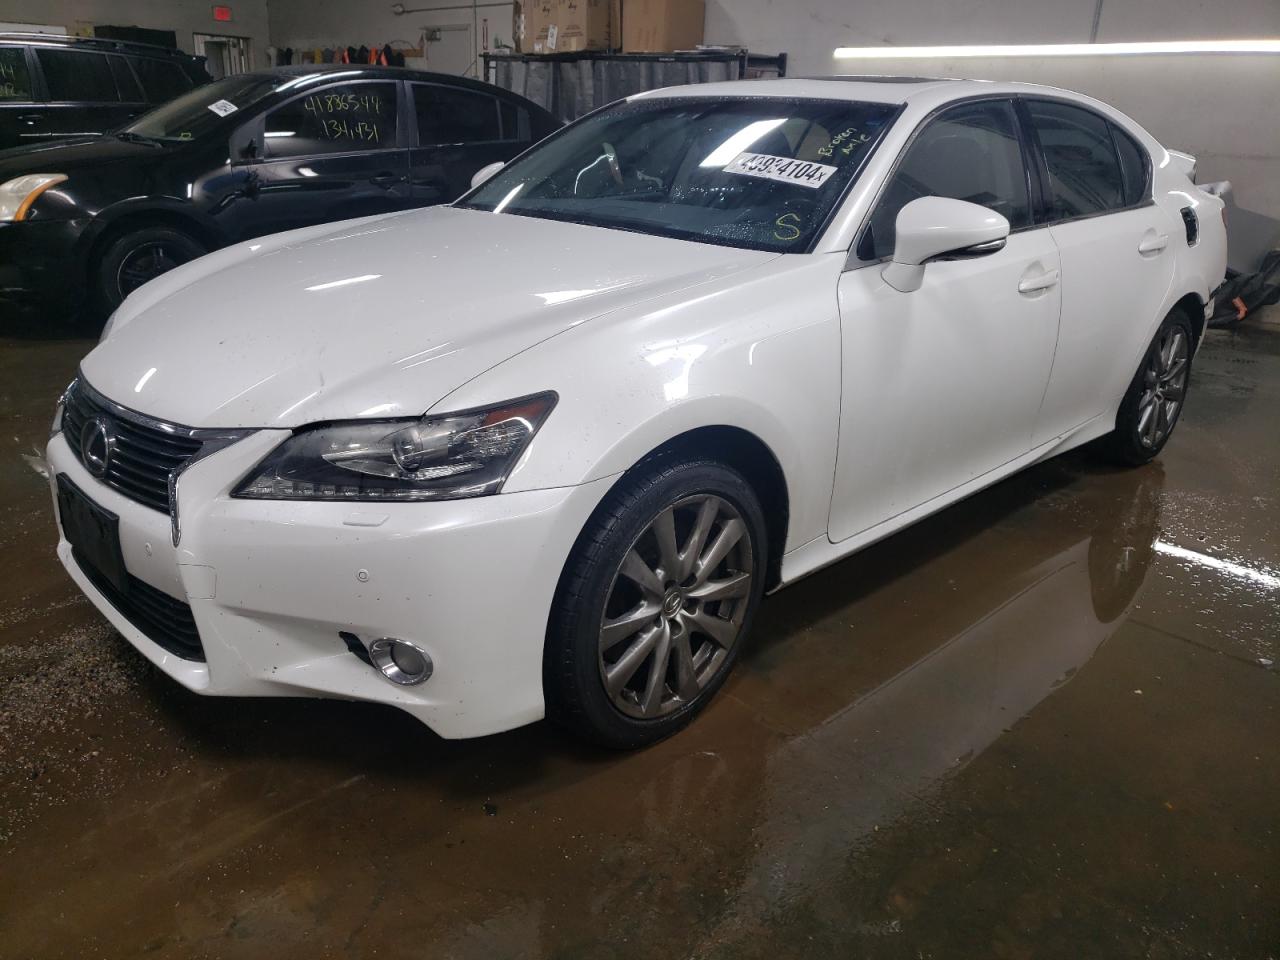 vin: JTHCE1BL6D5003486 JTHCE1BL6D5003486 2013 lexus gs 3500 for Sale in 60120 7419, Il - Chicago North, Elgin, USA